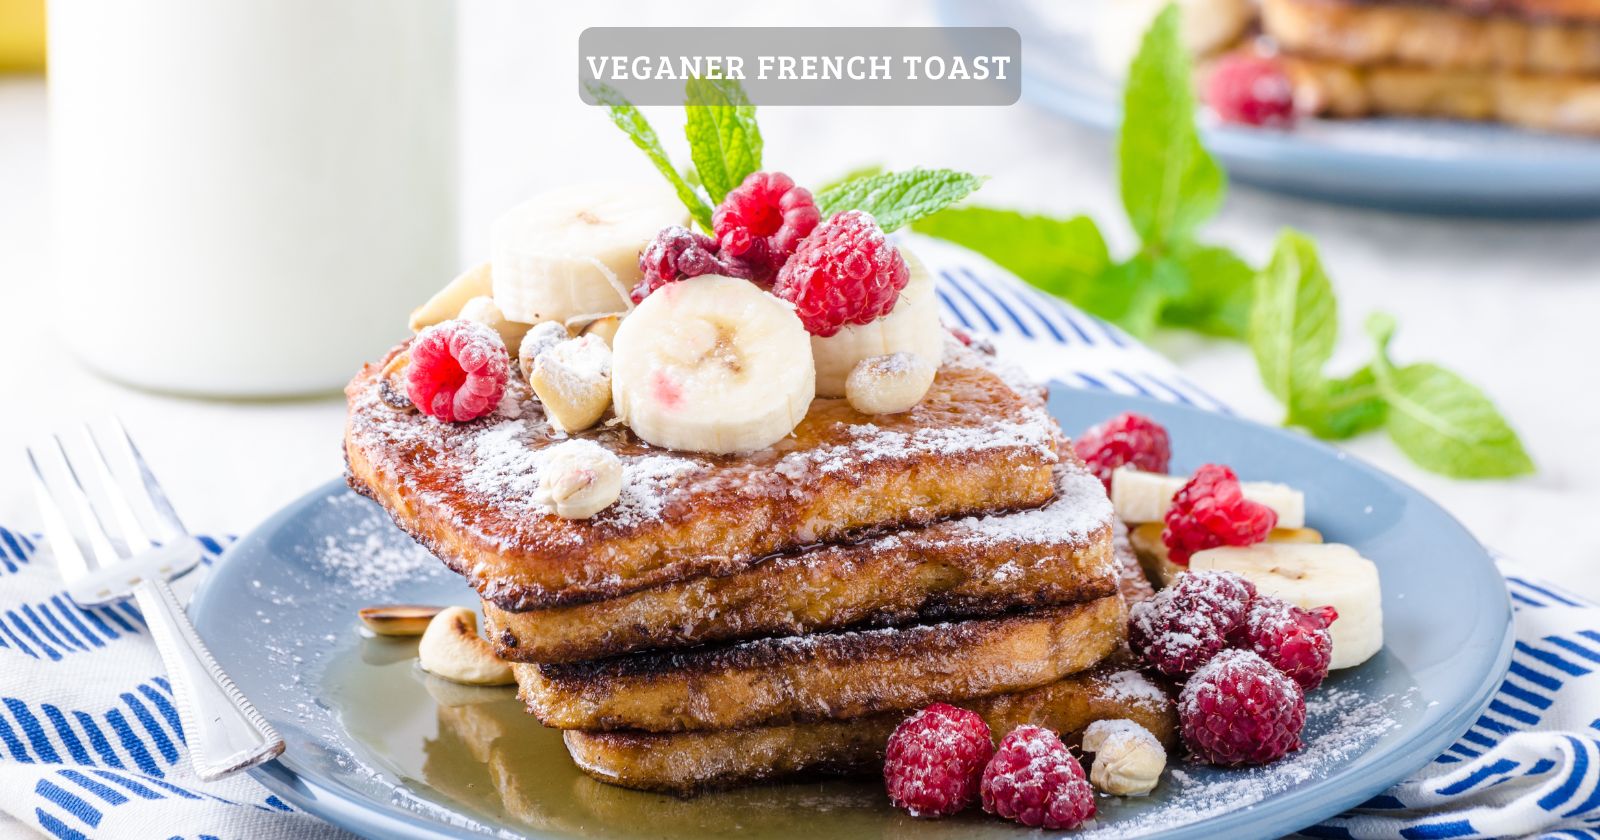 Veganer french toast mit toppings